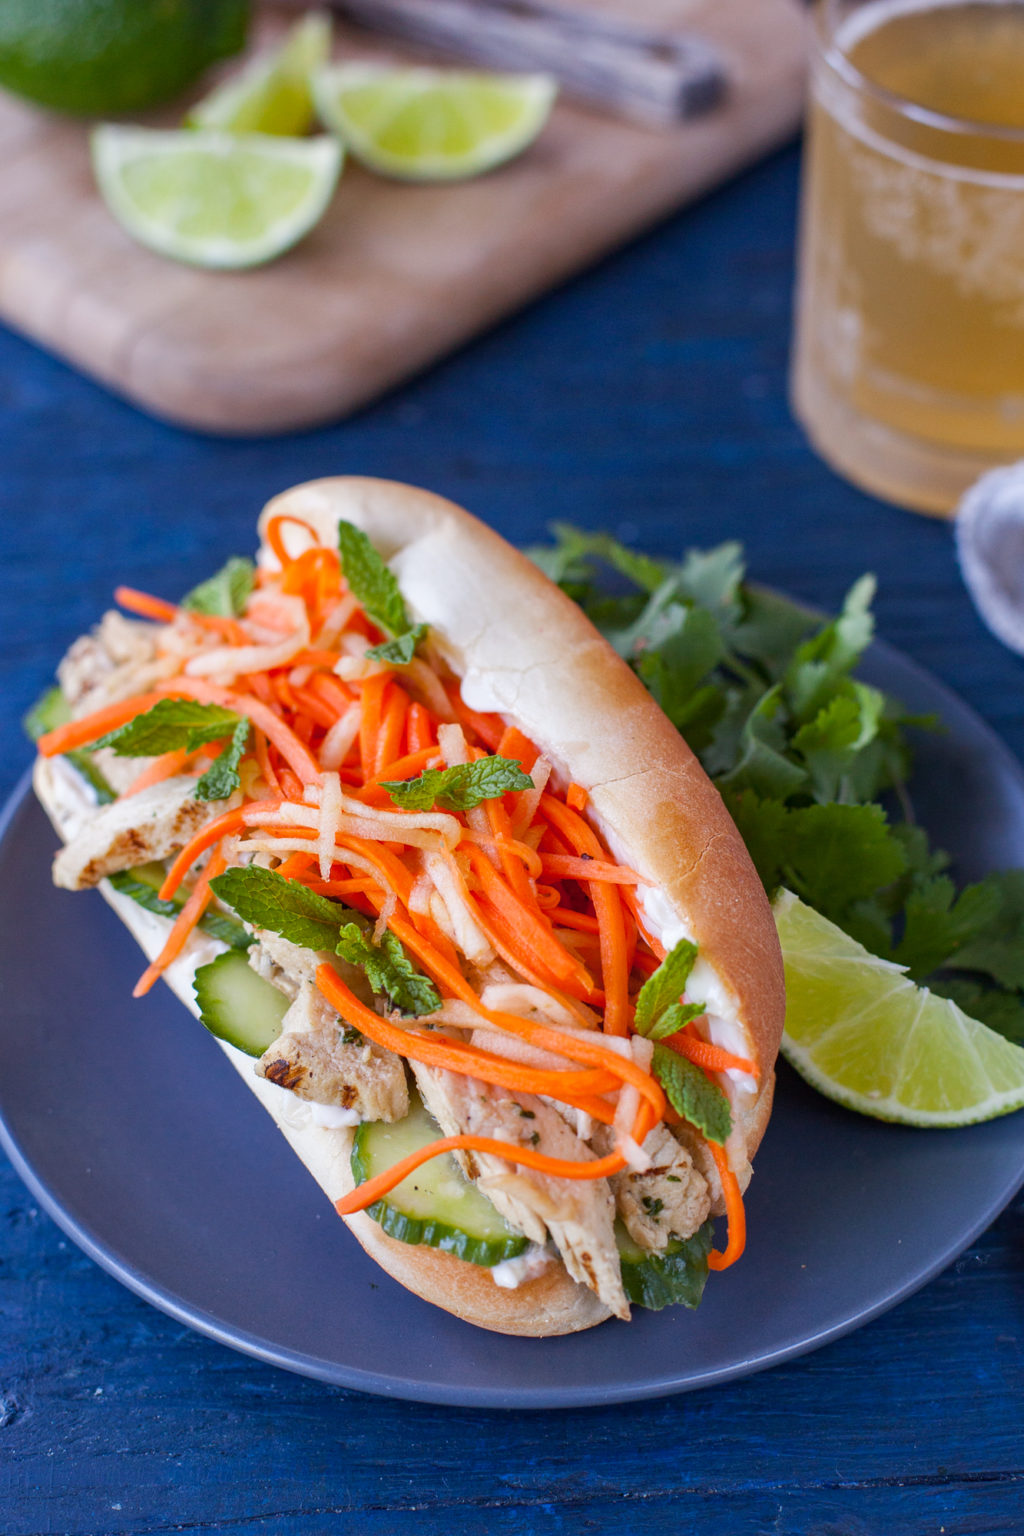 Vietnamese Sandwich Recipe with Grilled Chicken (Banh Mi) - Eating Richly